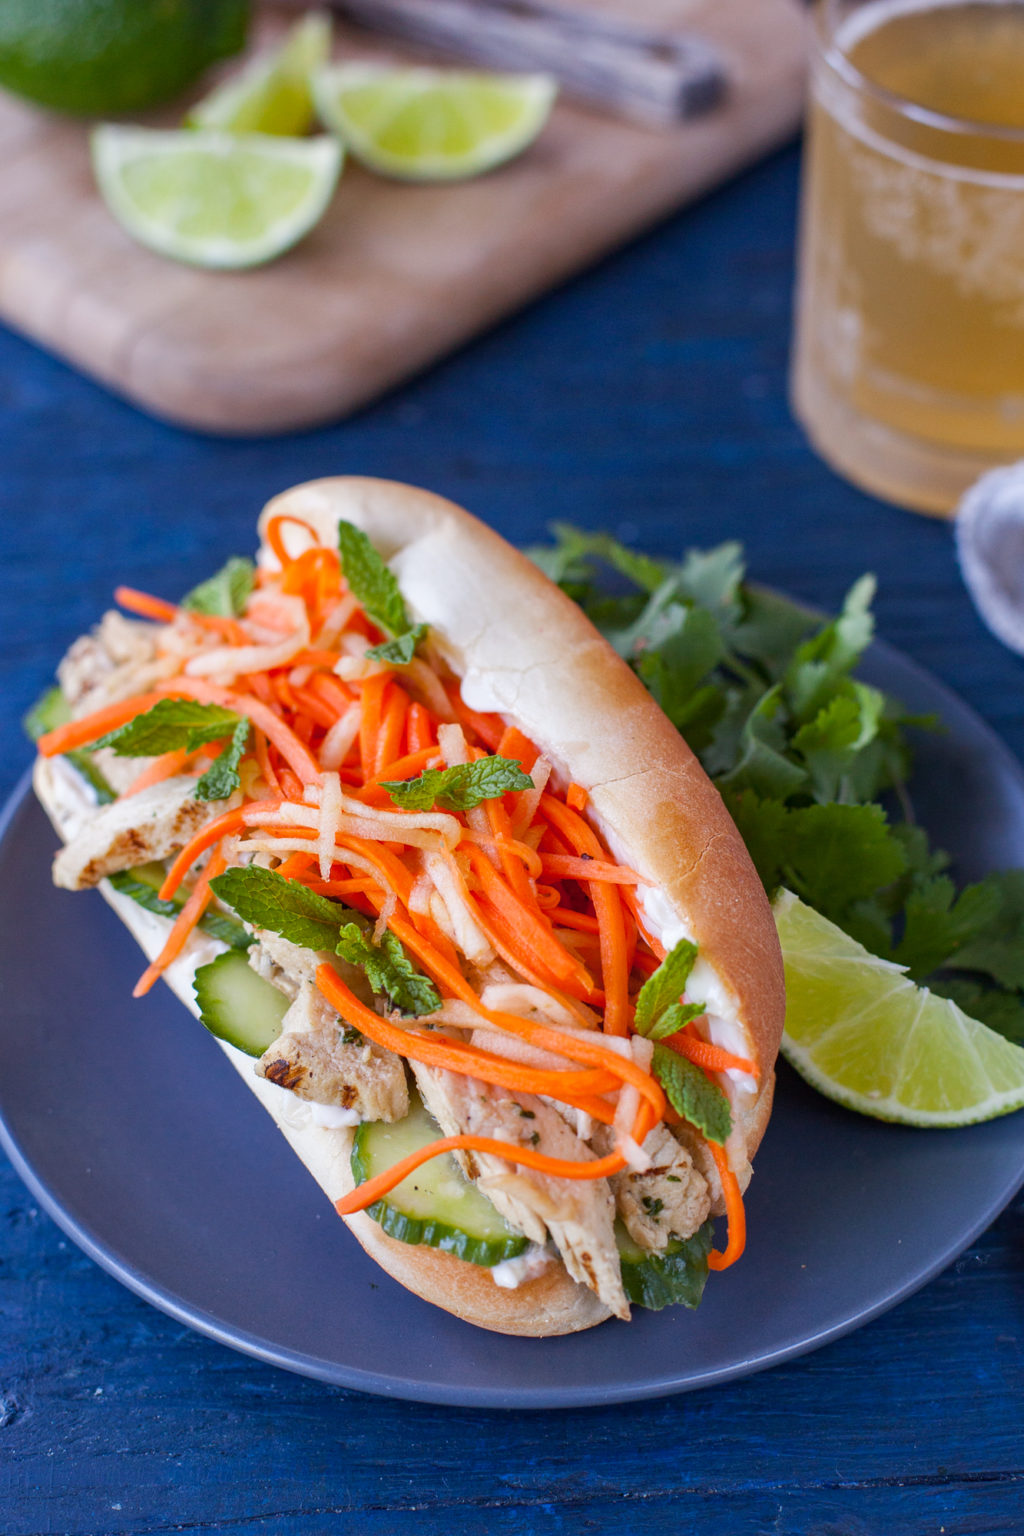 Vietnamese Sandwich Recipe with Grilled Chicken (Banh Mi) - Eating Richly